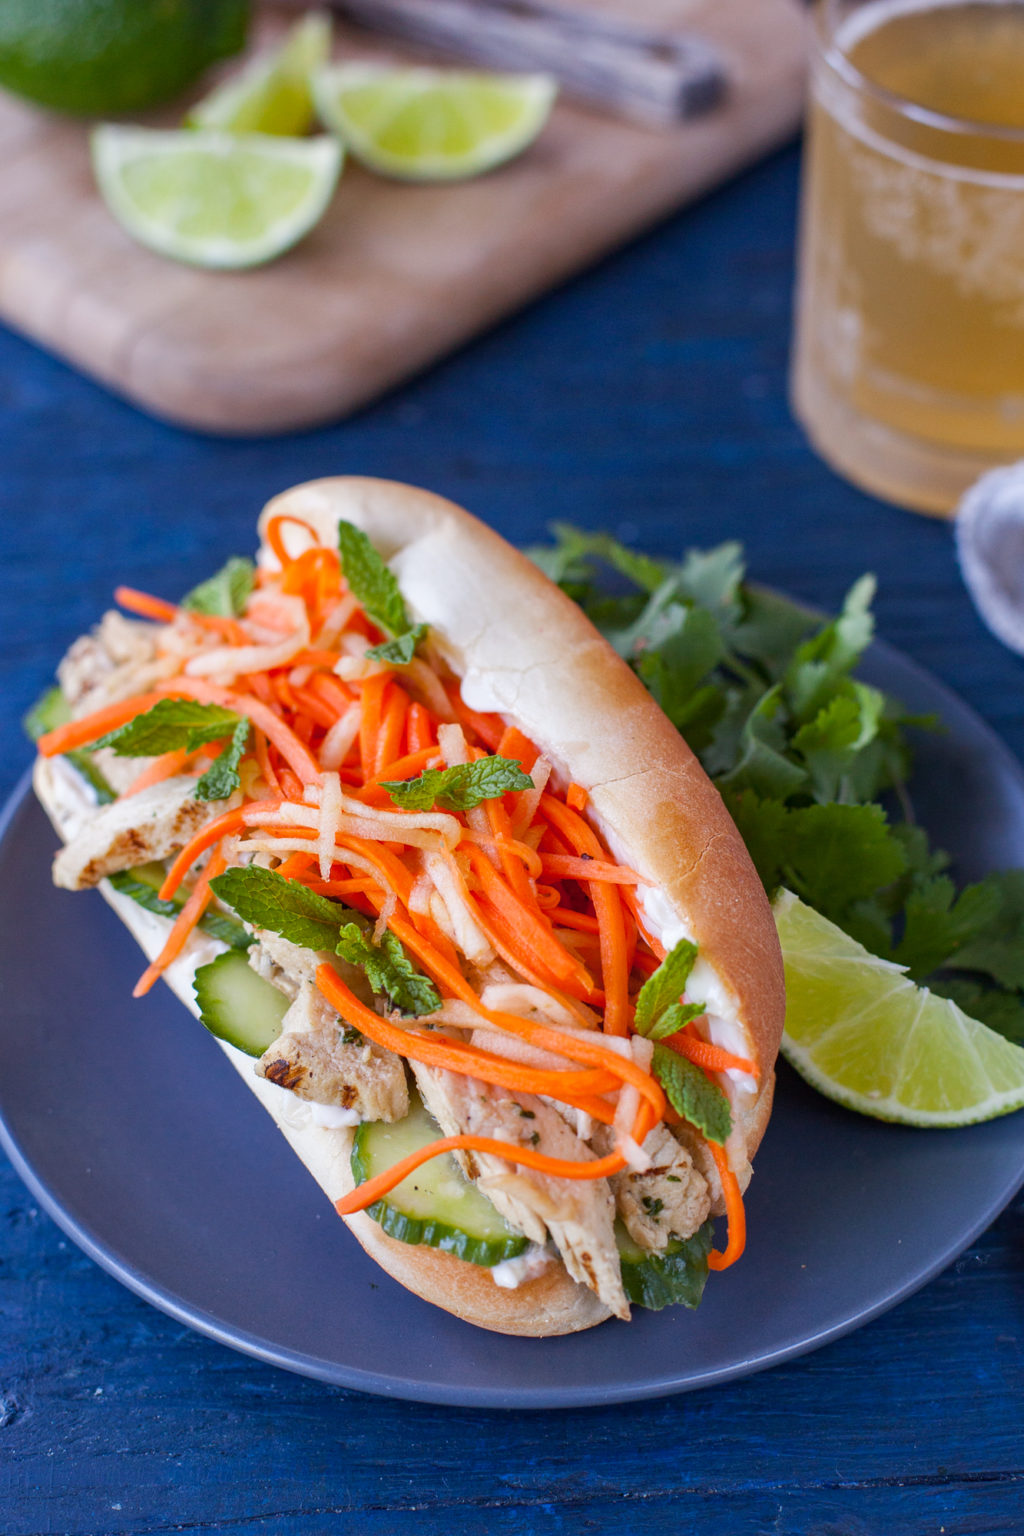 Vietnamese Sandwich Recipe with Grilled Chicken (Banh Mi) - Eating Richly